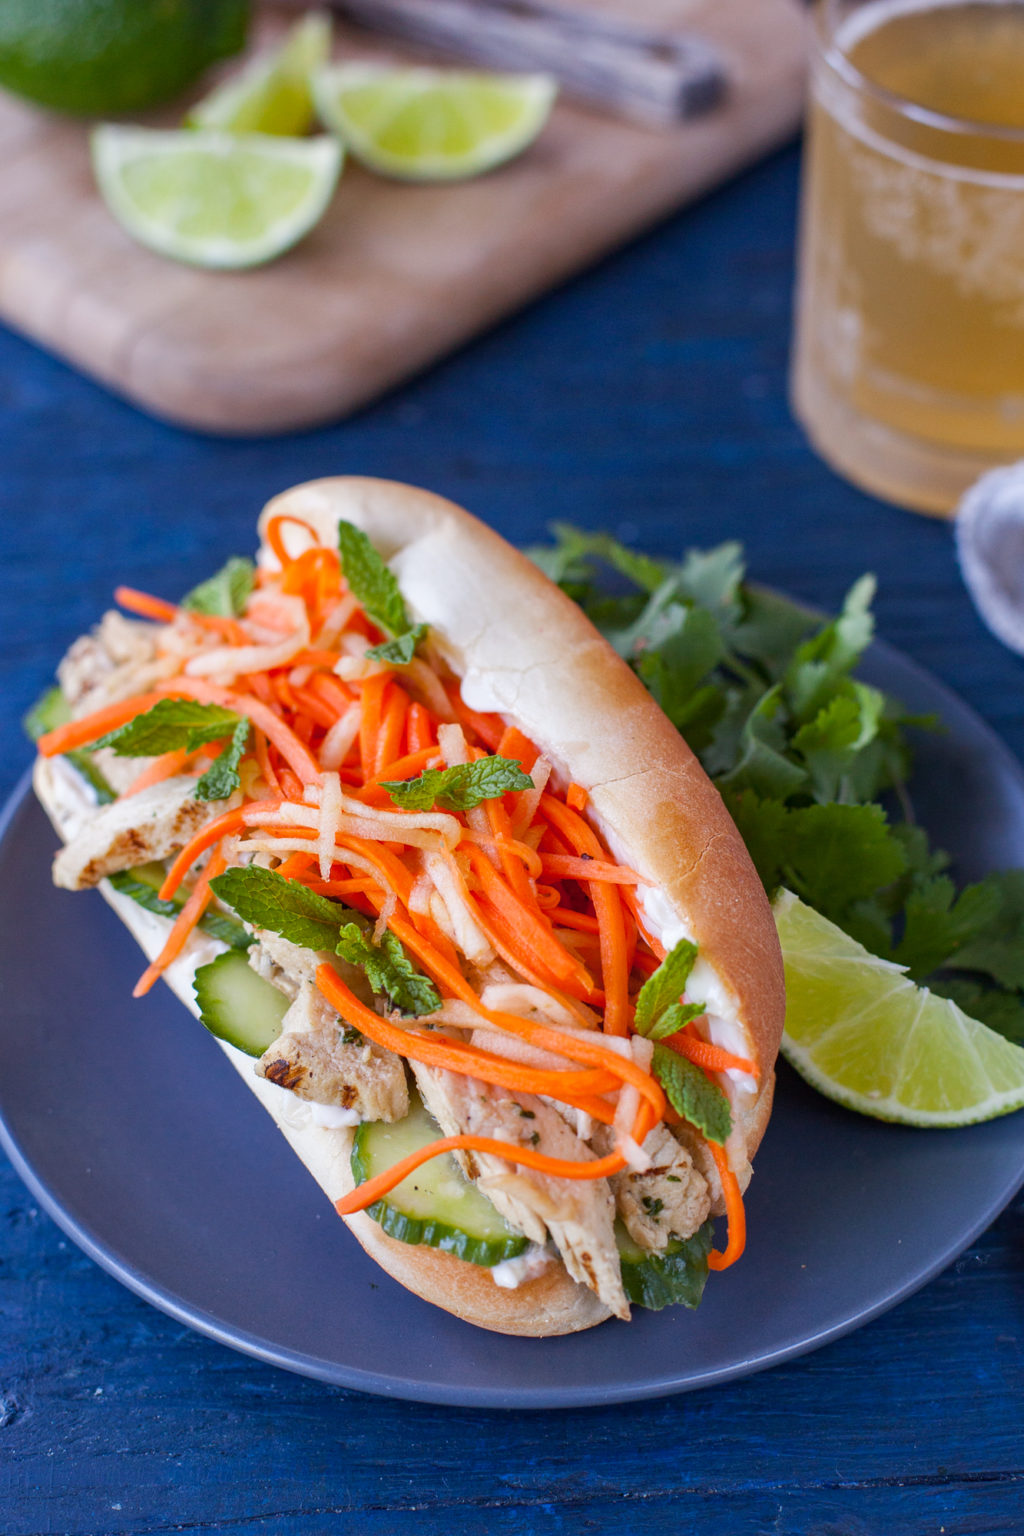 Vietnamese Sandwich Recipe with Grilled Chicken (Banh Mi) - Eating Richly